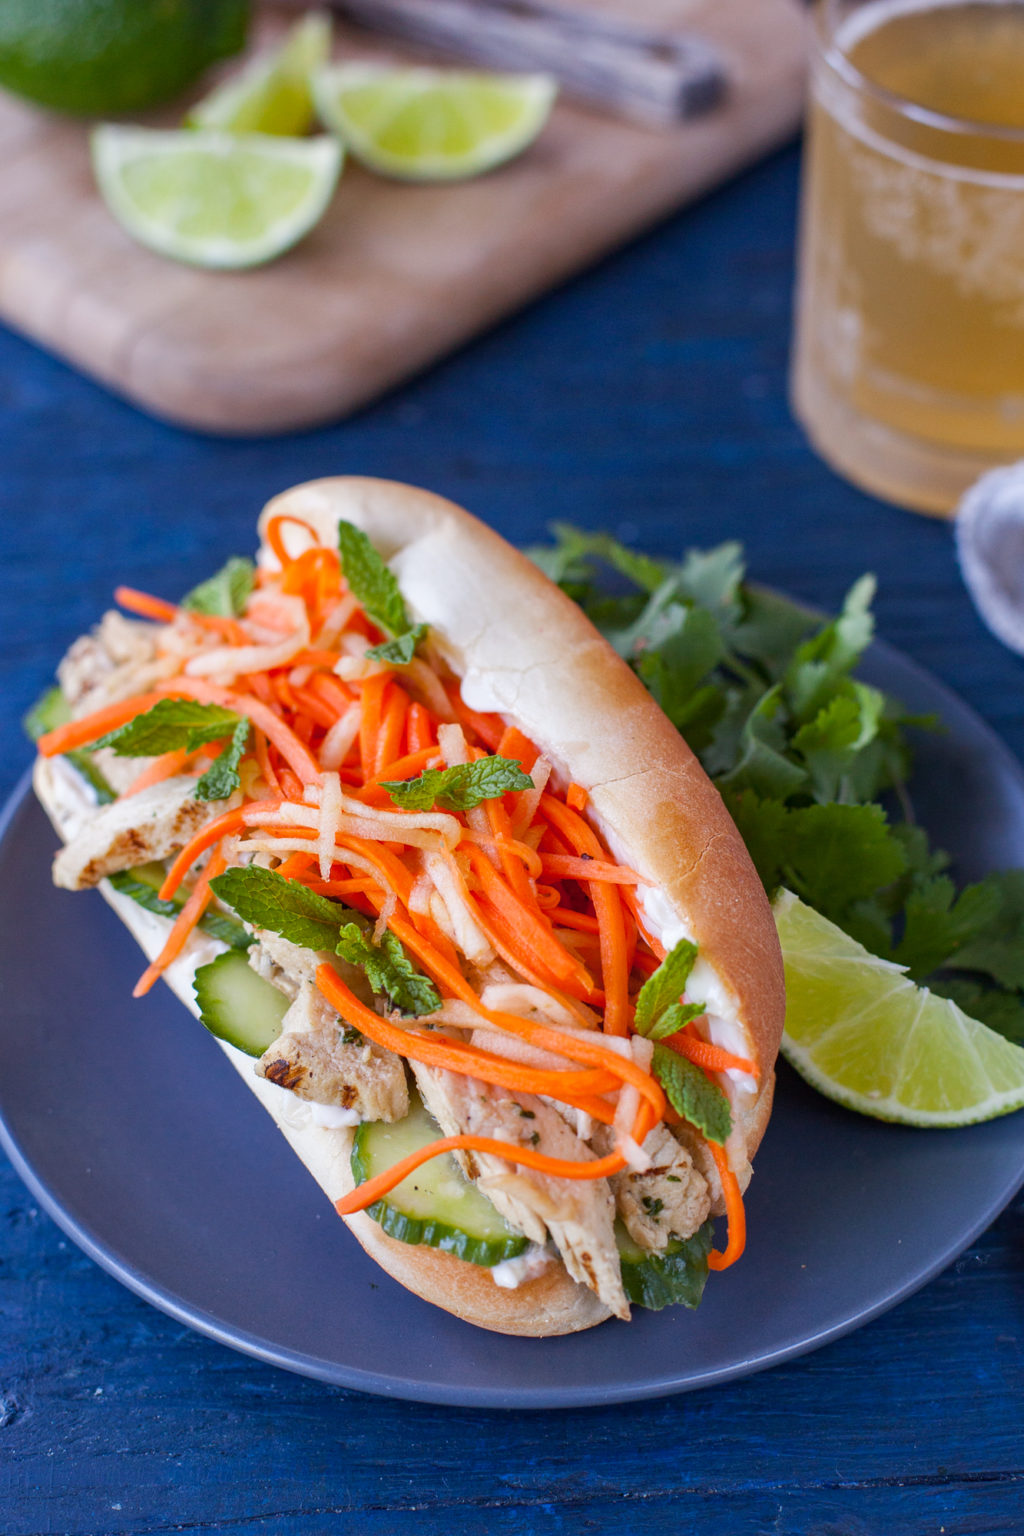 Vietnamese Sandwich Recipe with Grilled Chicken (Banh Mi) - Eating Richly